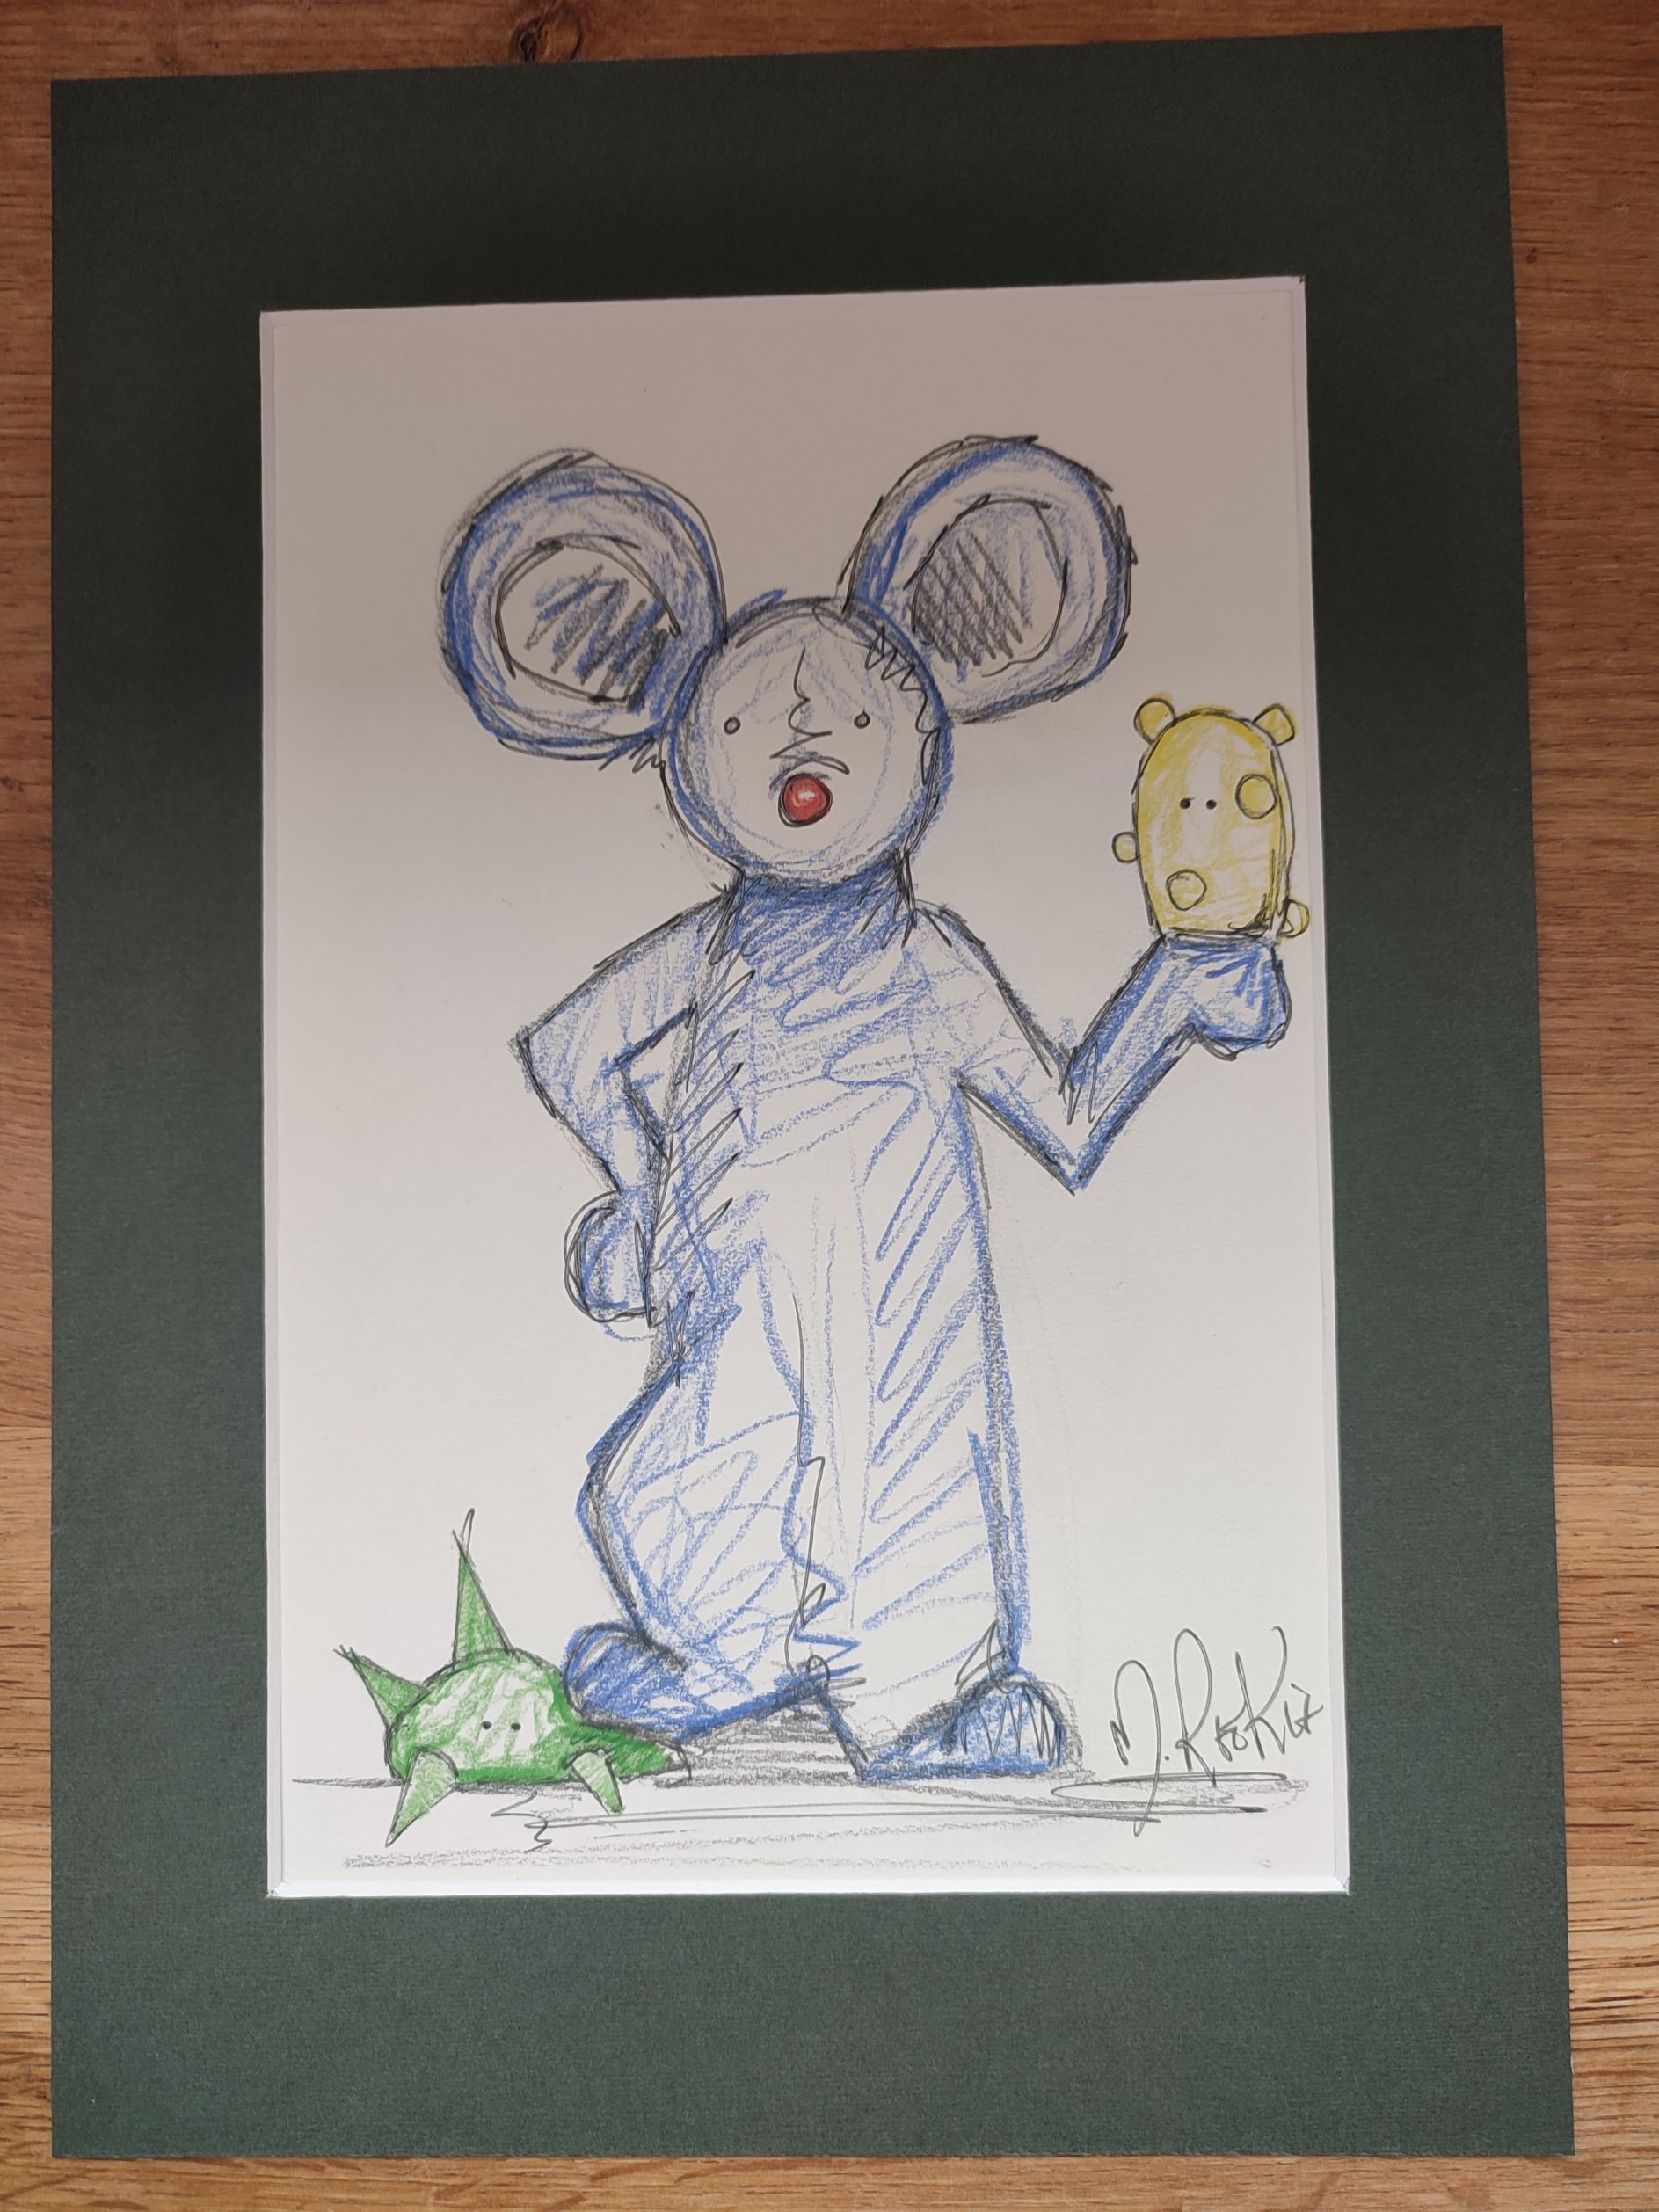 Original Sketch, Blue Mouse Holding Yellow Creature